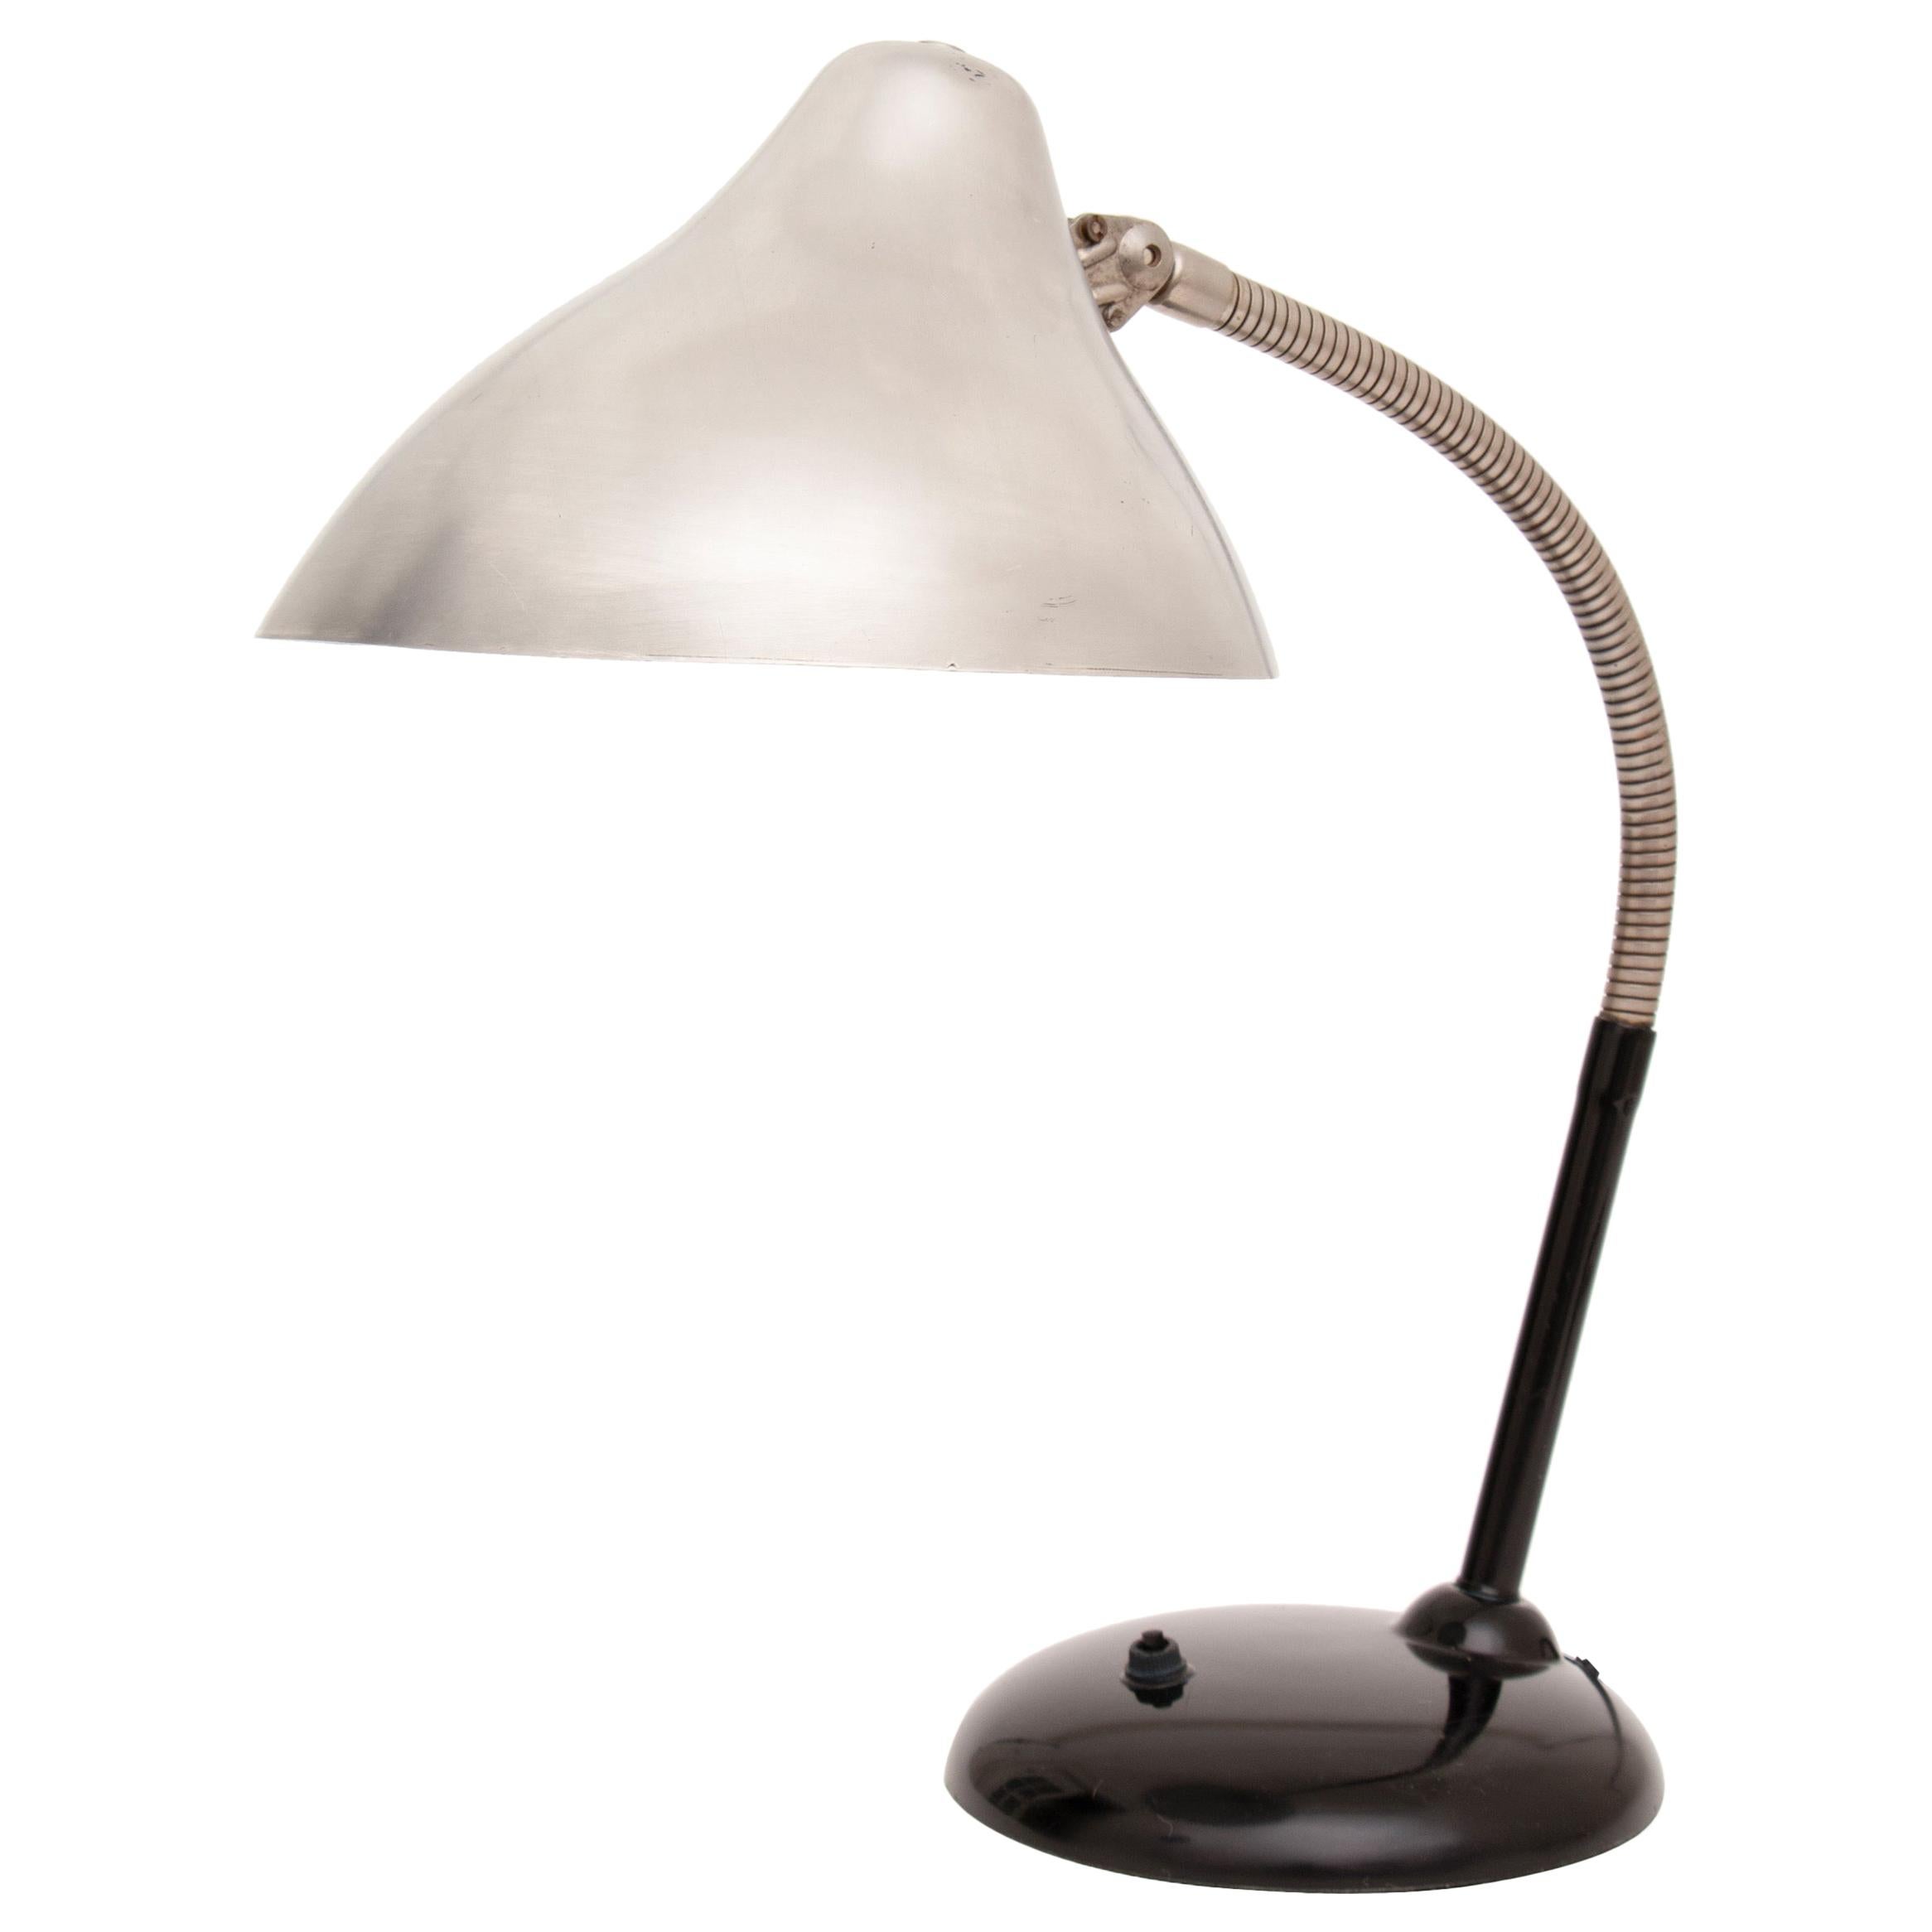 Midcentury Bauhaus Desk Lamp with Pivoting Canopy For Sale